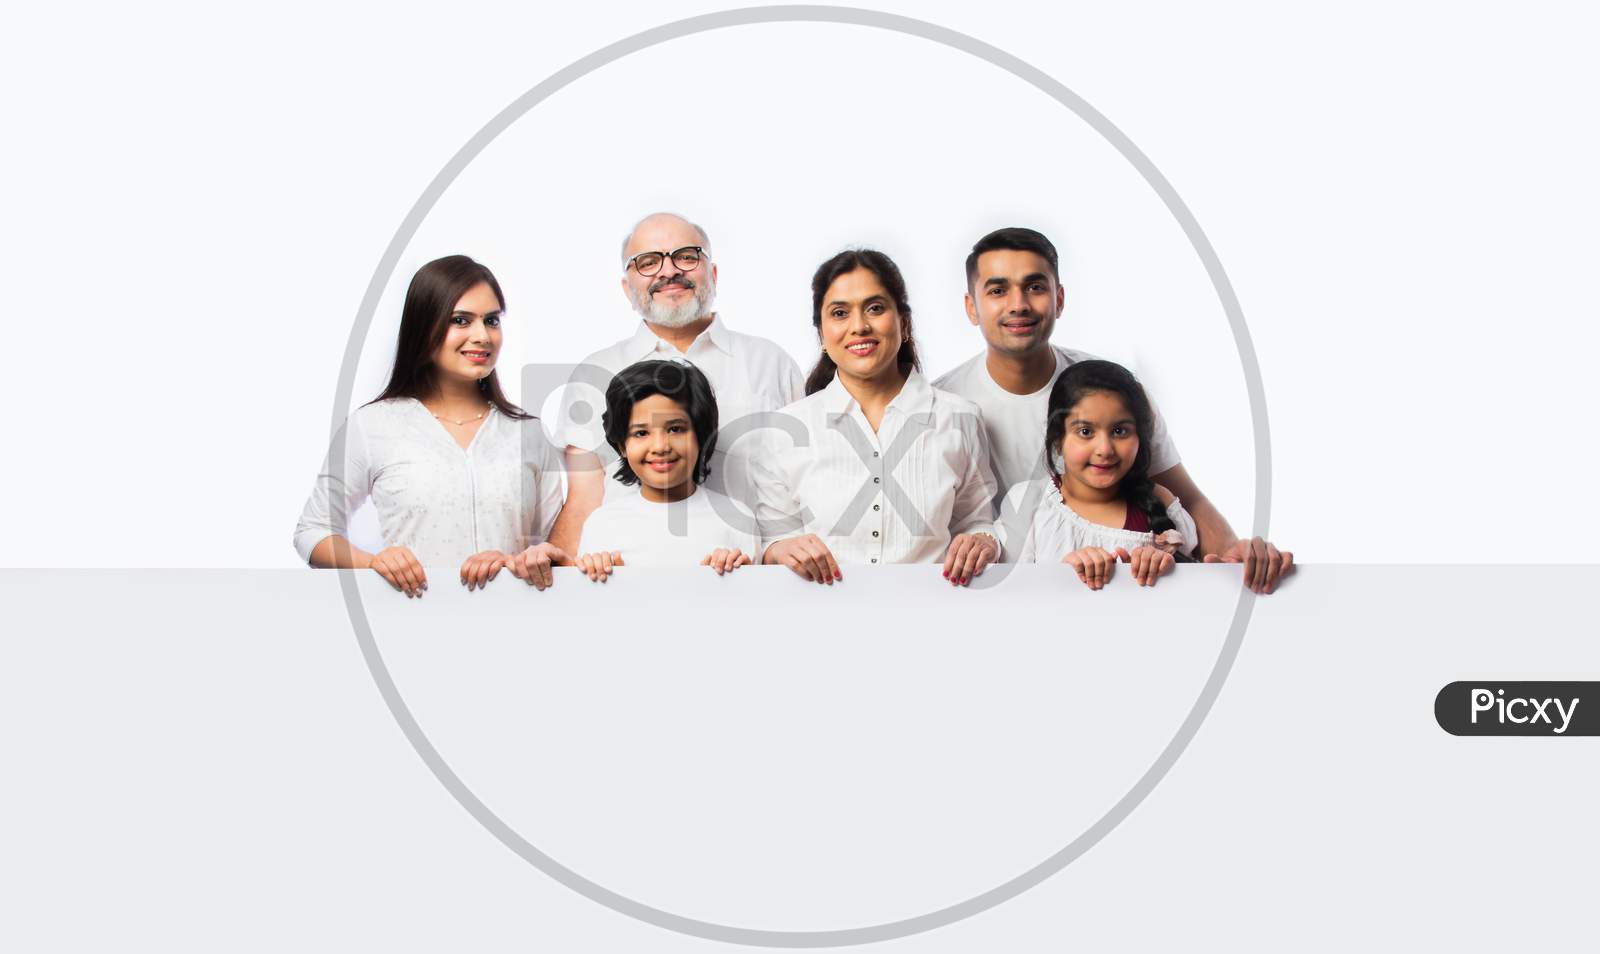 Indian Happy Family Holding Or Presenting White Board, Wall Or Placard